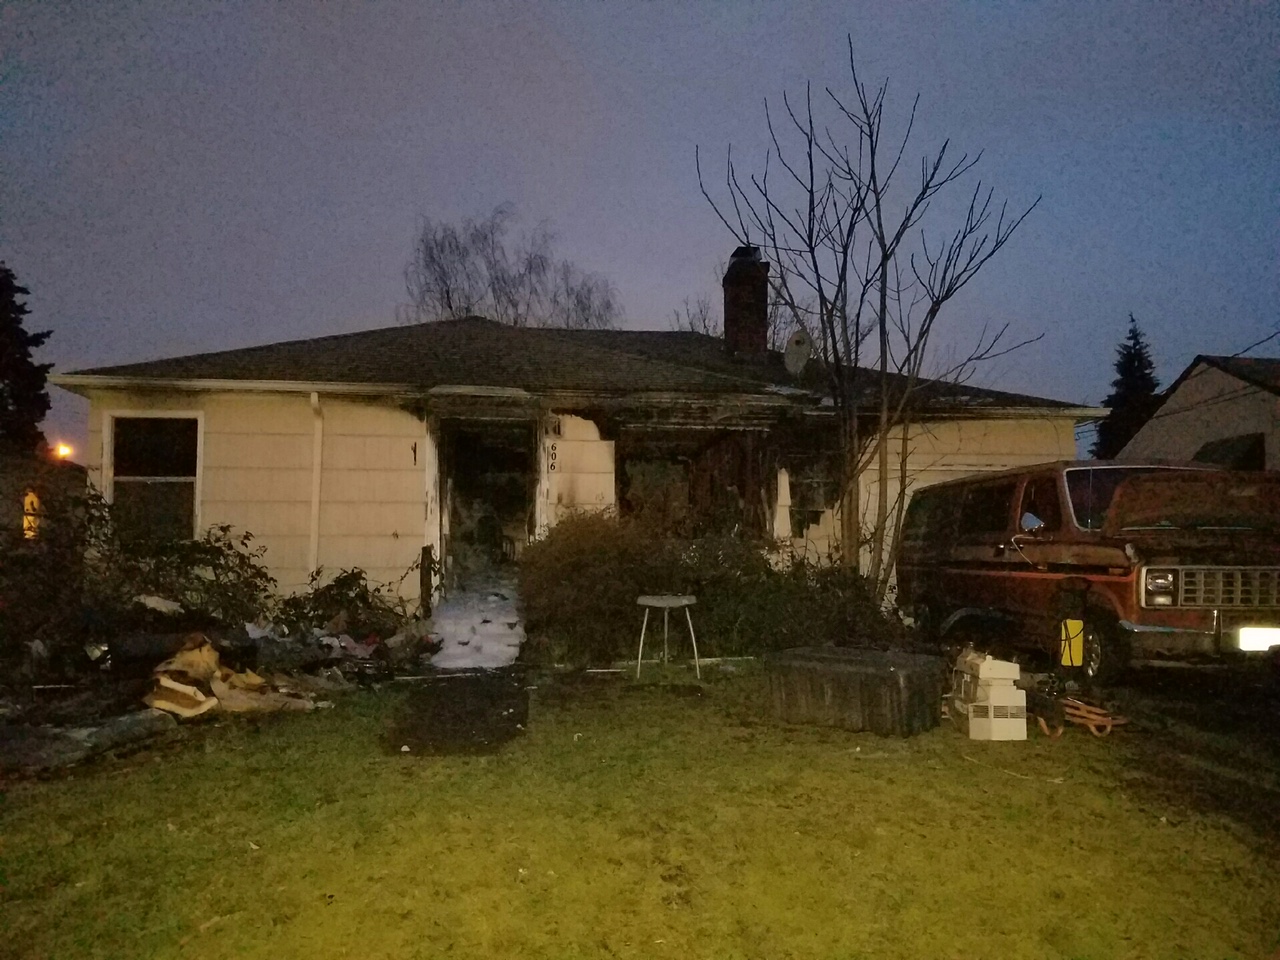 One person was displaced and a dog was killed in an early morning fire that heavily damaged a house in Vancouver's Edgewood Park neighborhood.